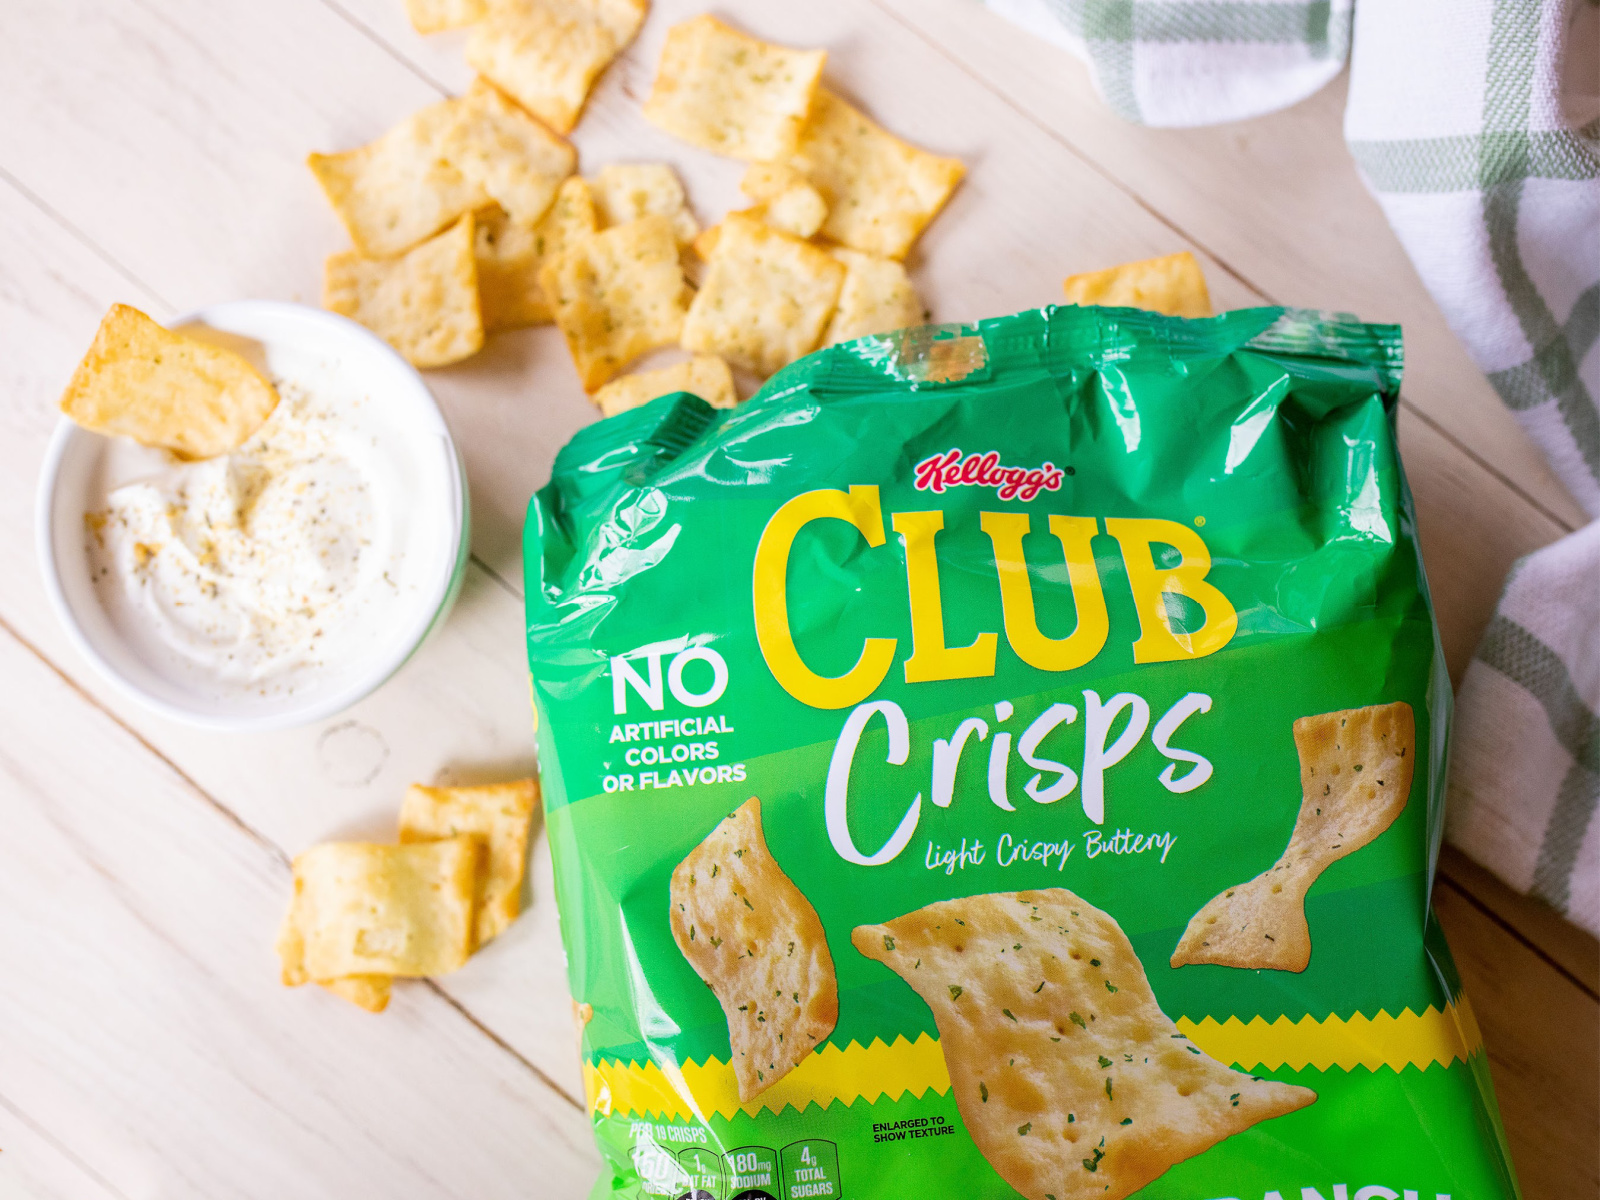 Prepare For Bowl Season With Kellogg’s Club Crisps – Save With The New Digital Coupon